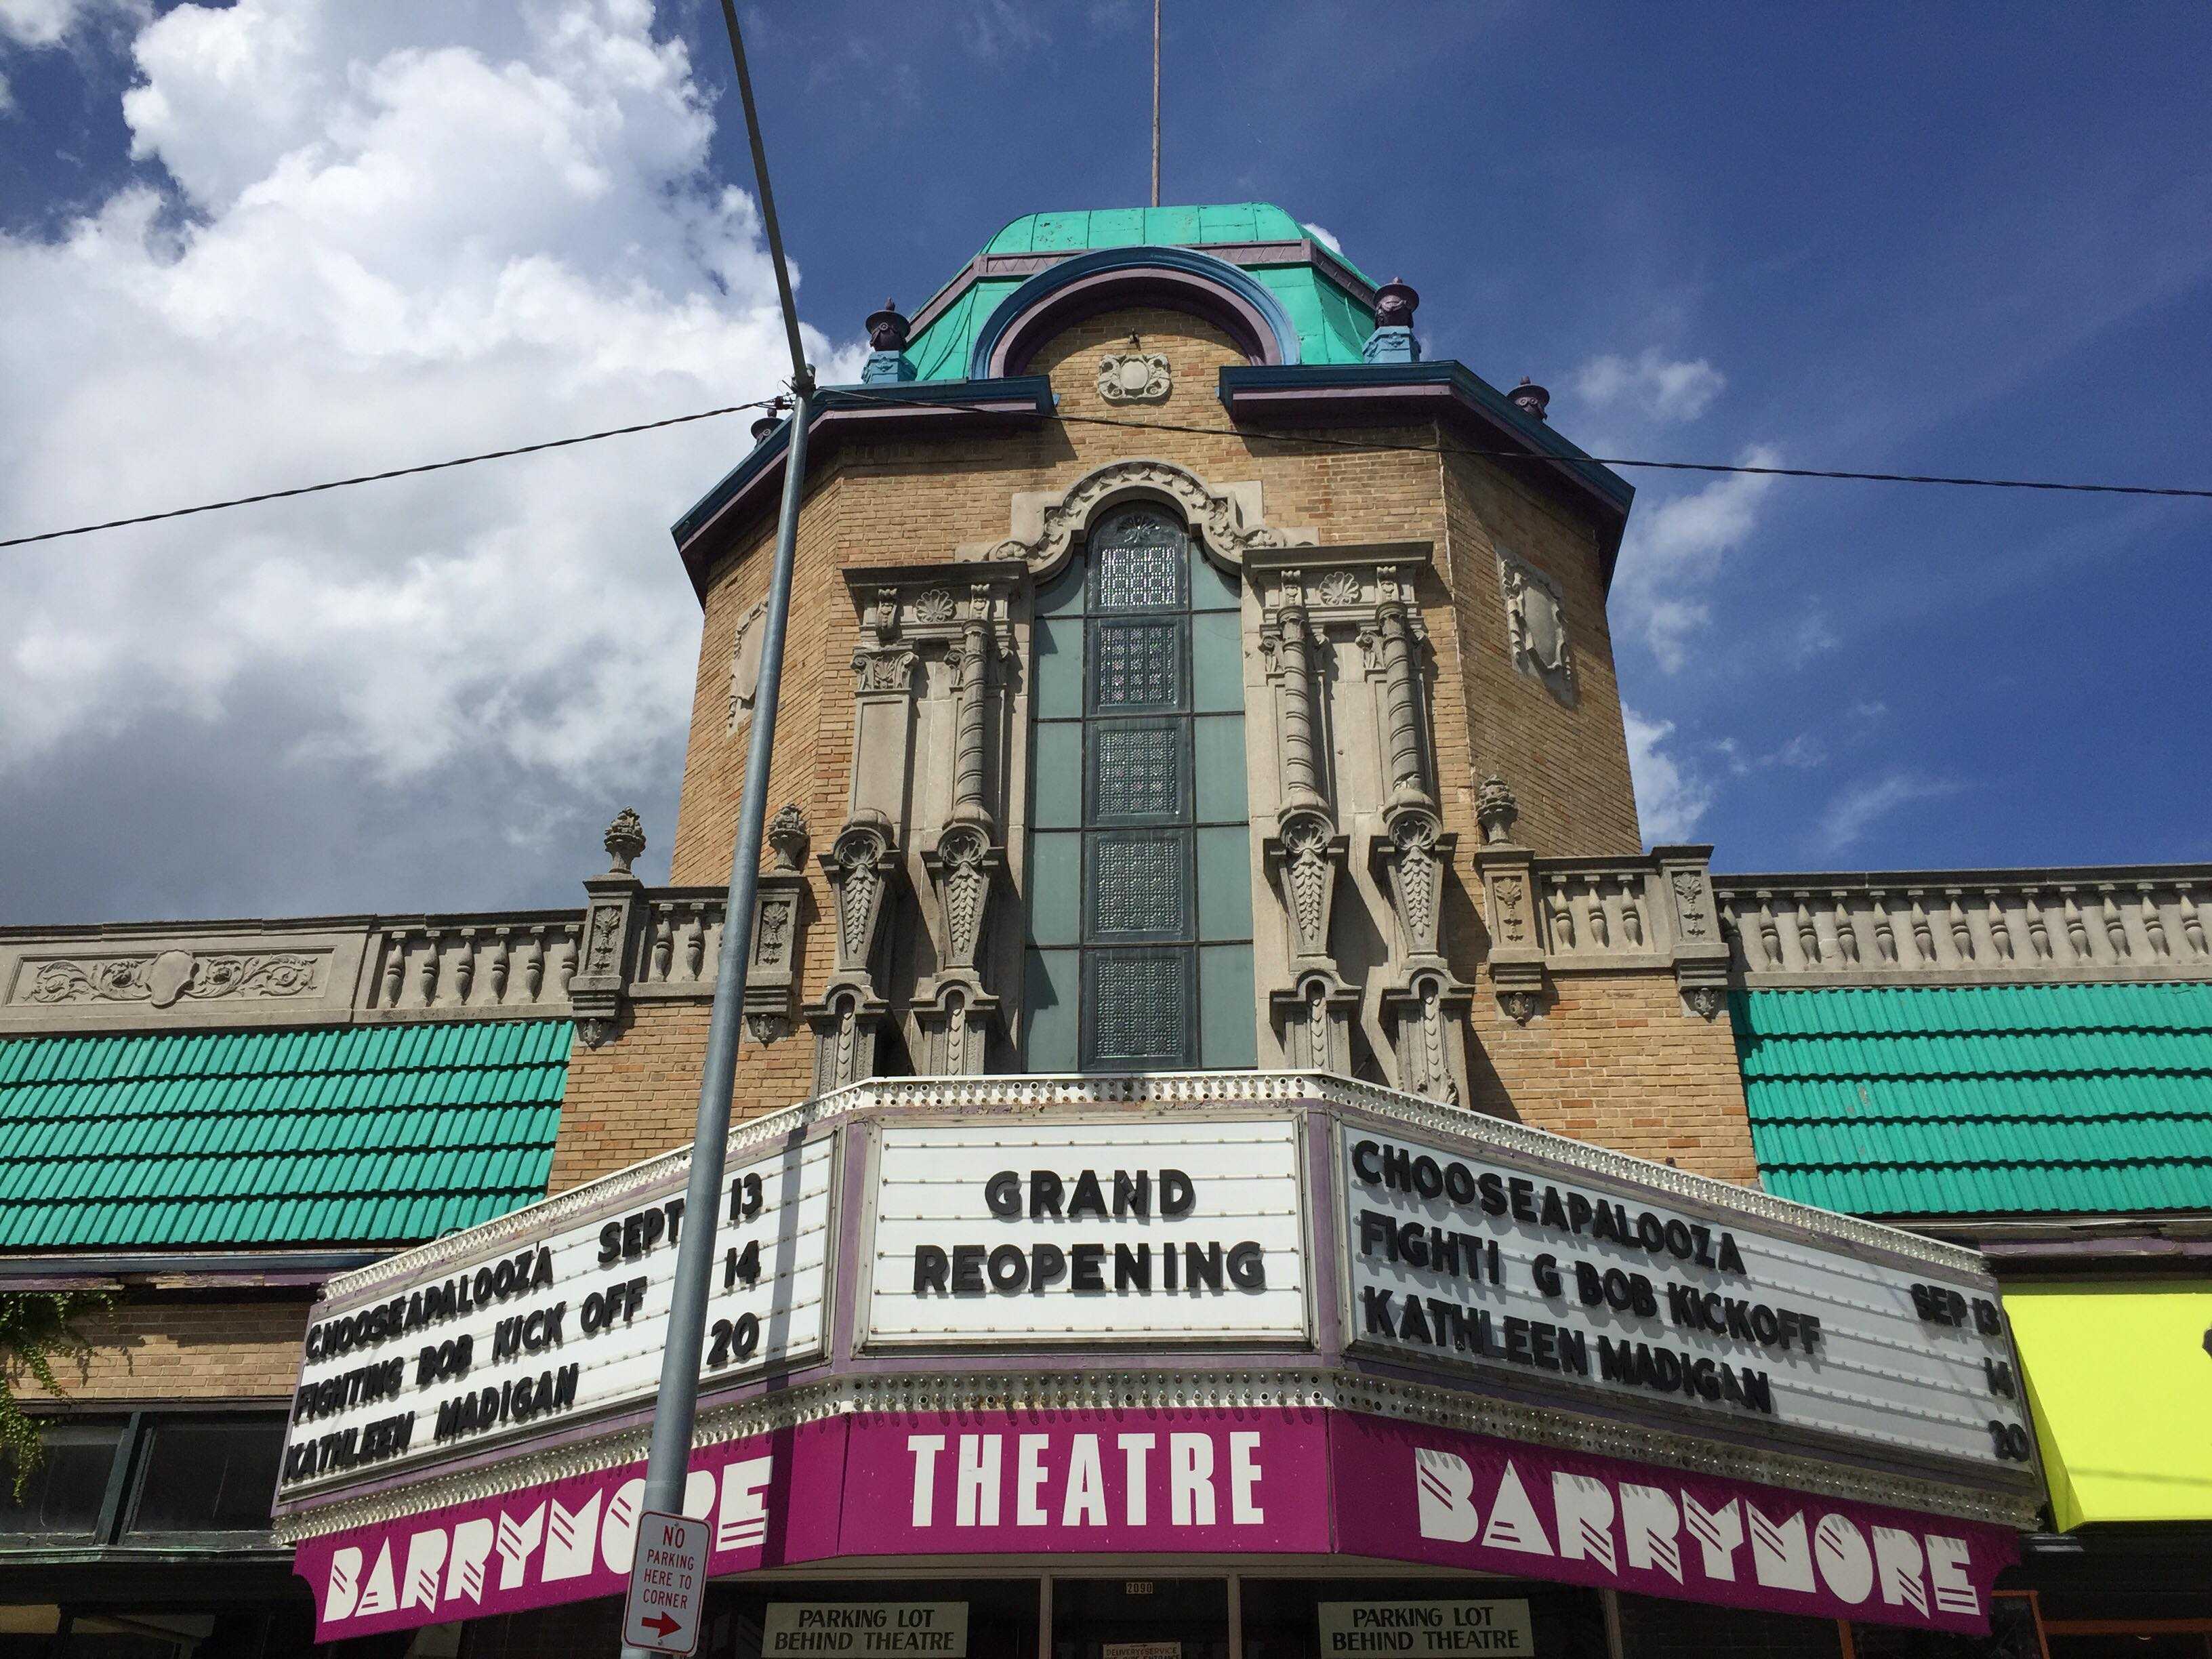 HUMP! film festival brings sex positivity to Barrymore Theater · The Badger Herald